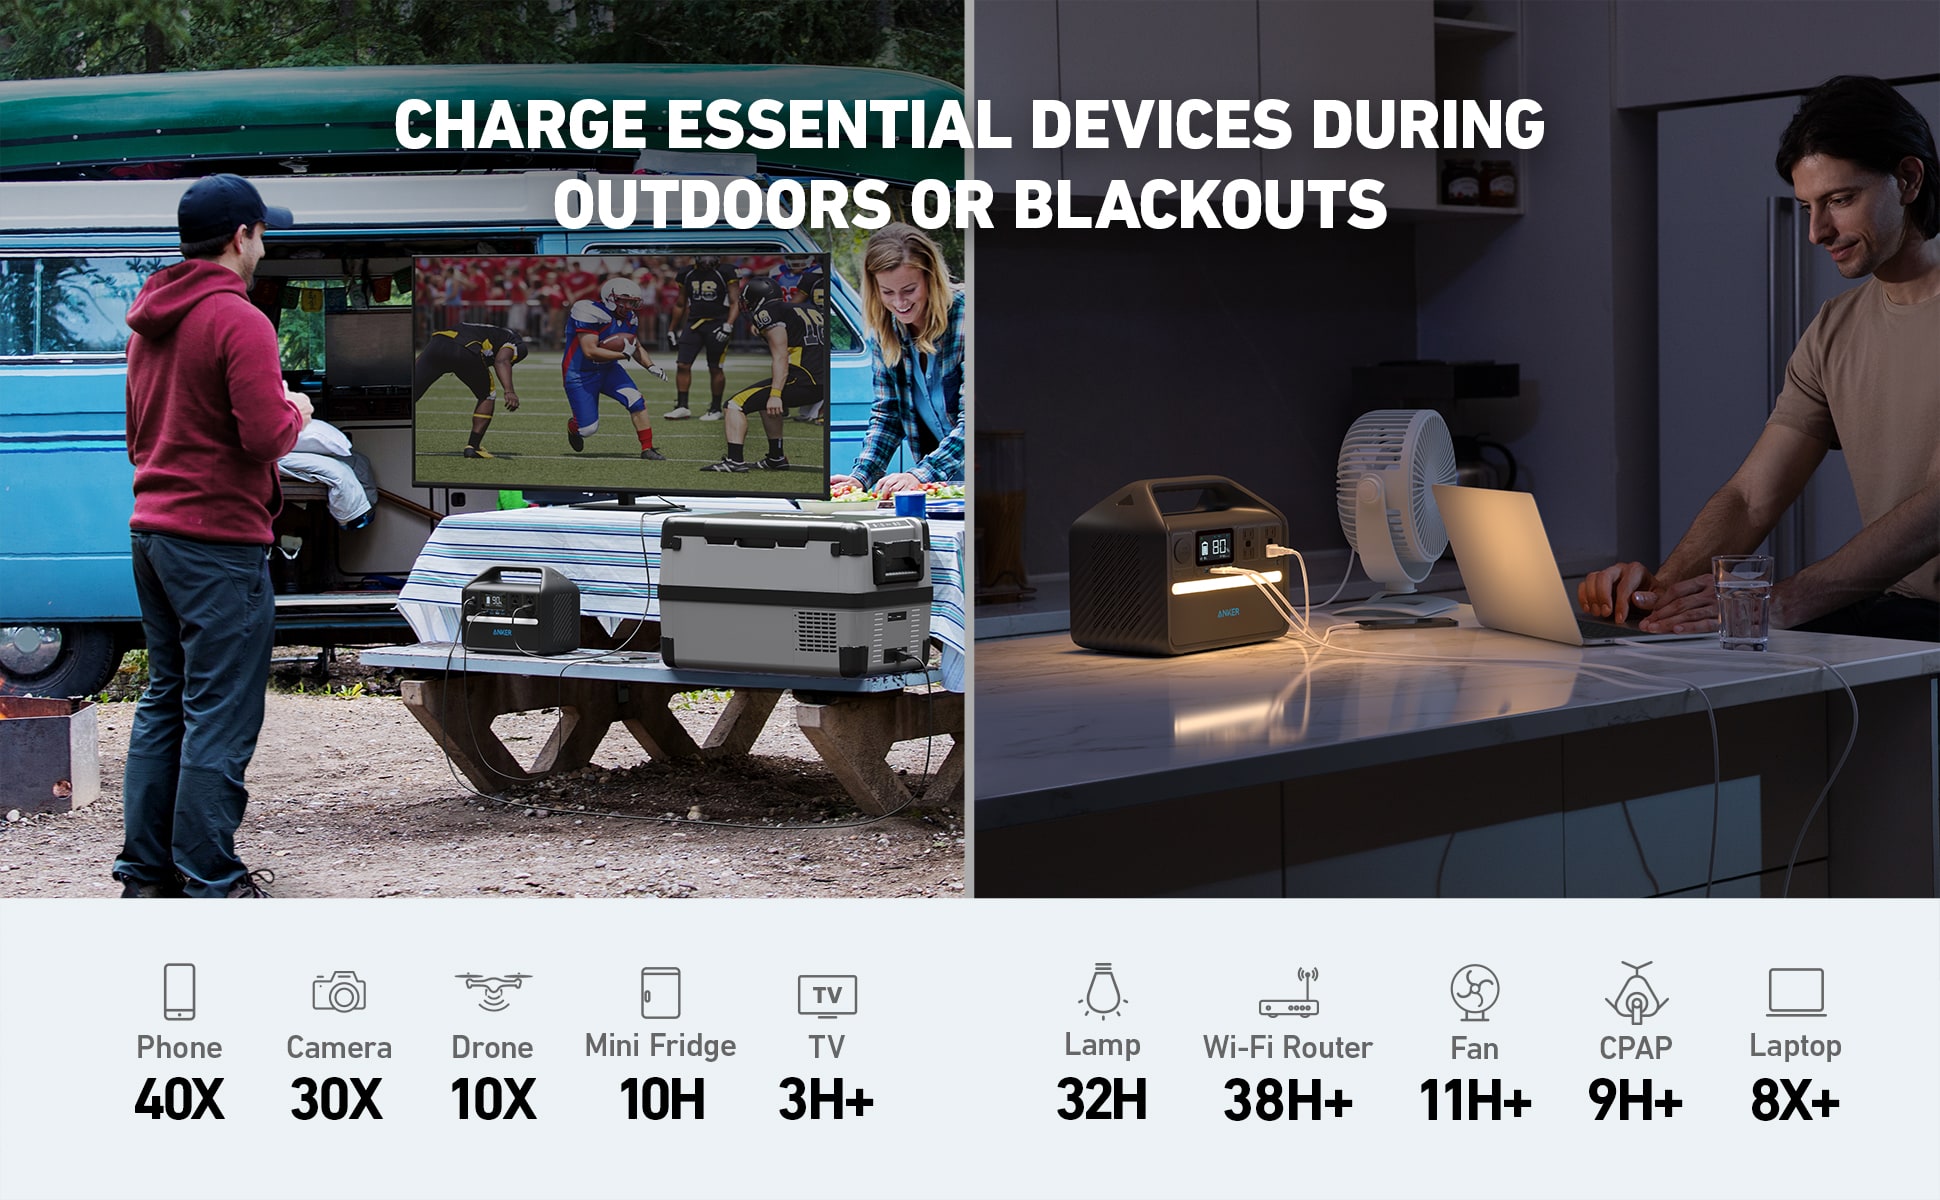 Charge essential devices during outdoors or blackcouts